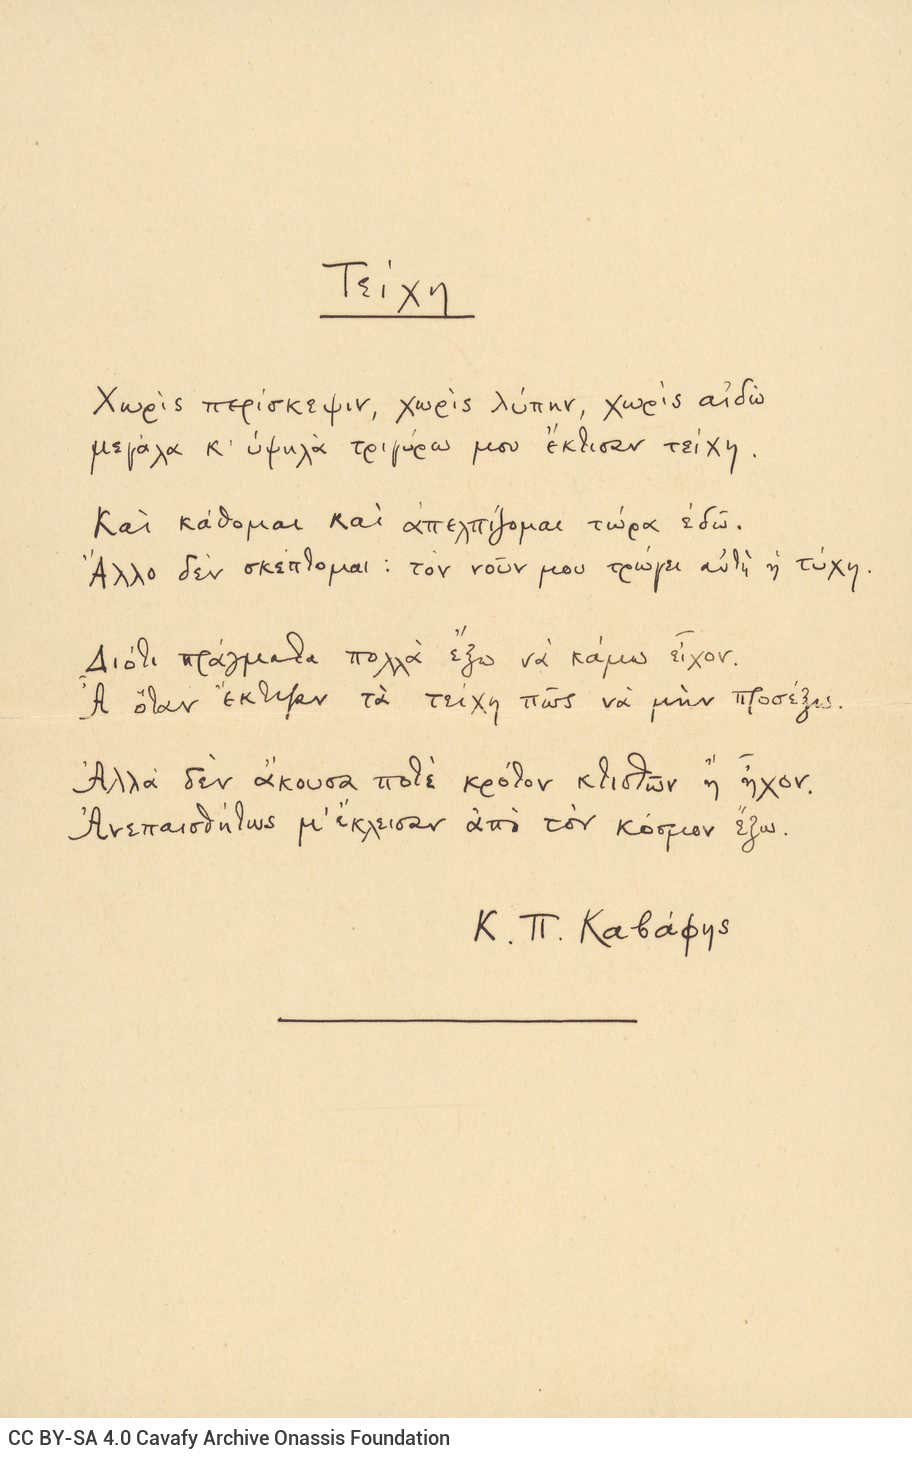 Signed manuscript of the poem "Walls". The title has been underlined and there is a line underneath the poem. Blank verso.